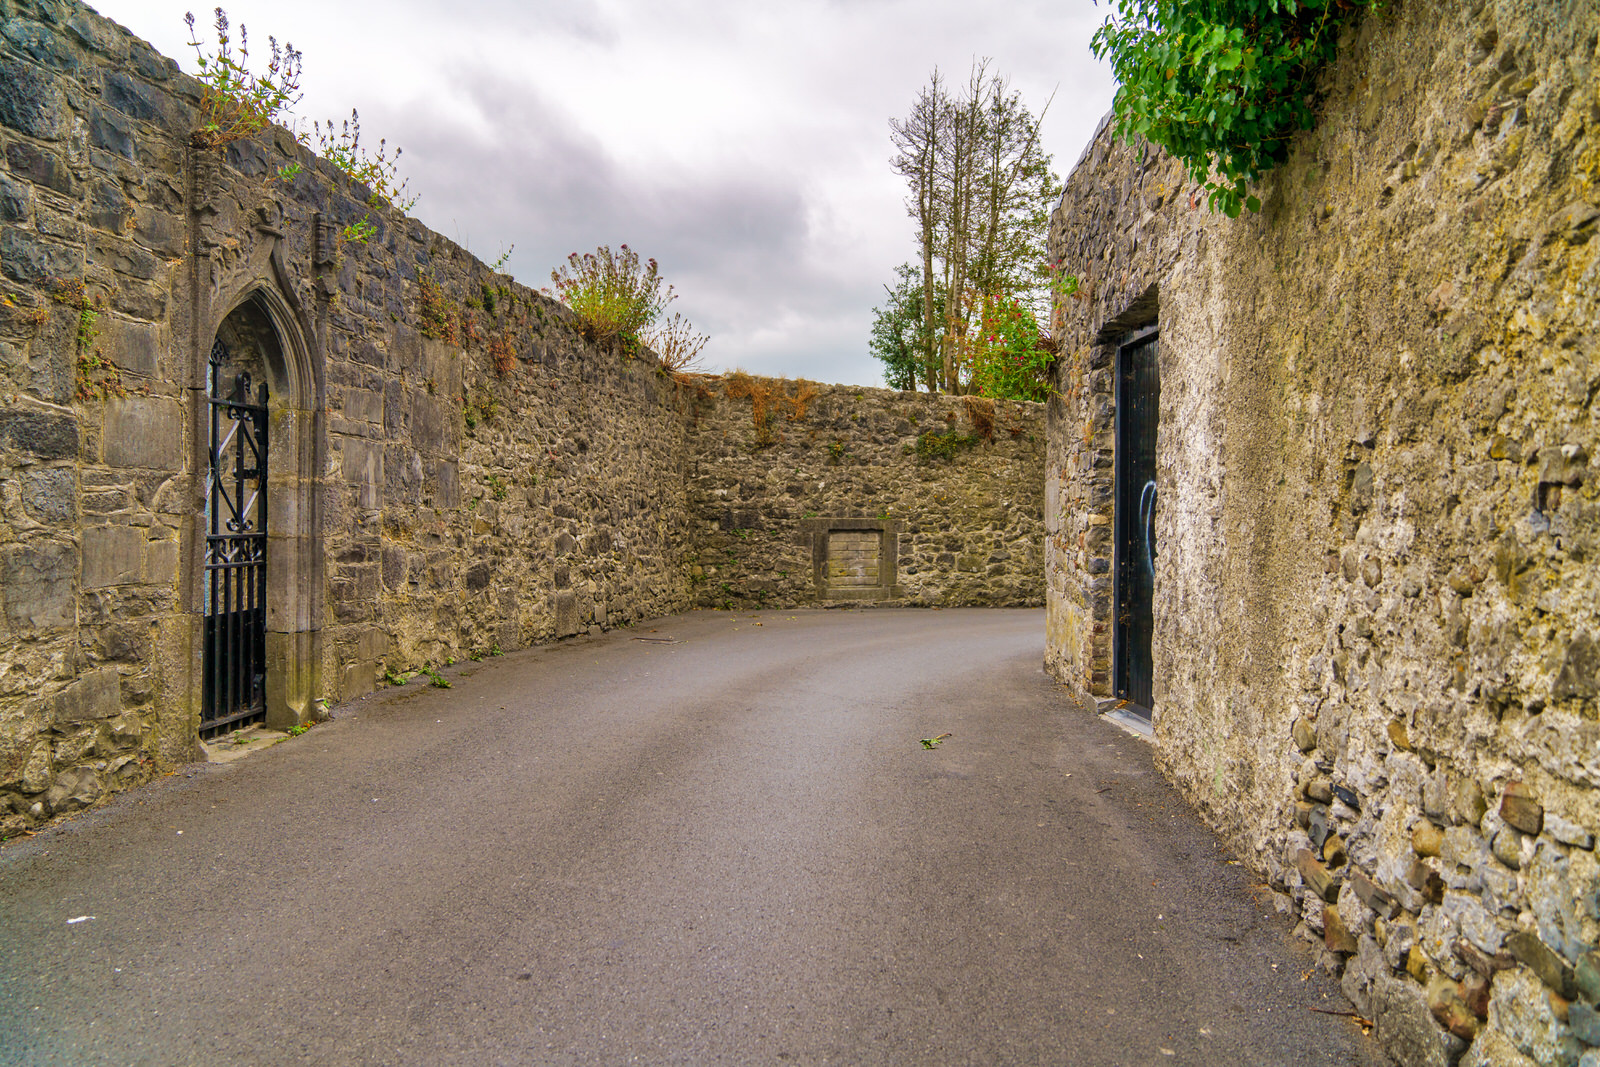 IN 2018 I EXPLORED A NARROW LANE NETWORK IN KILKENNY [DEAN STREET TO BUTT'S GREEN]-234267-1